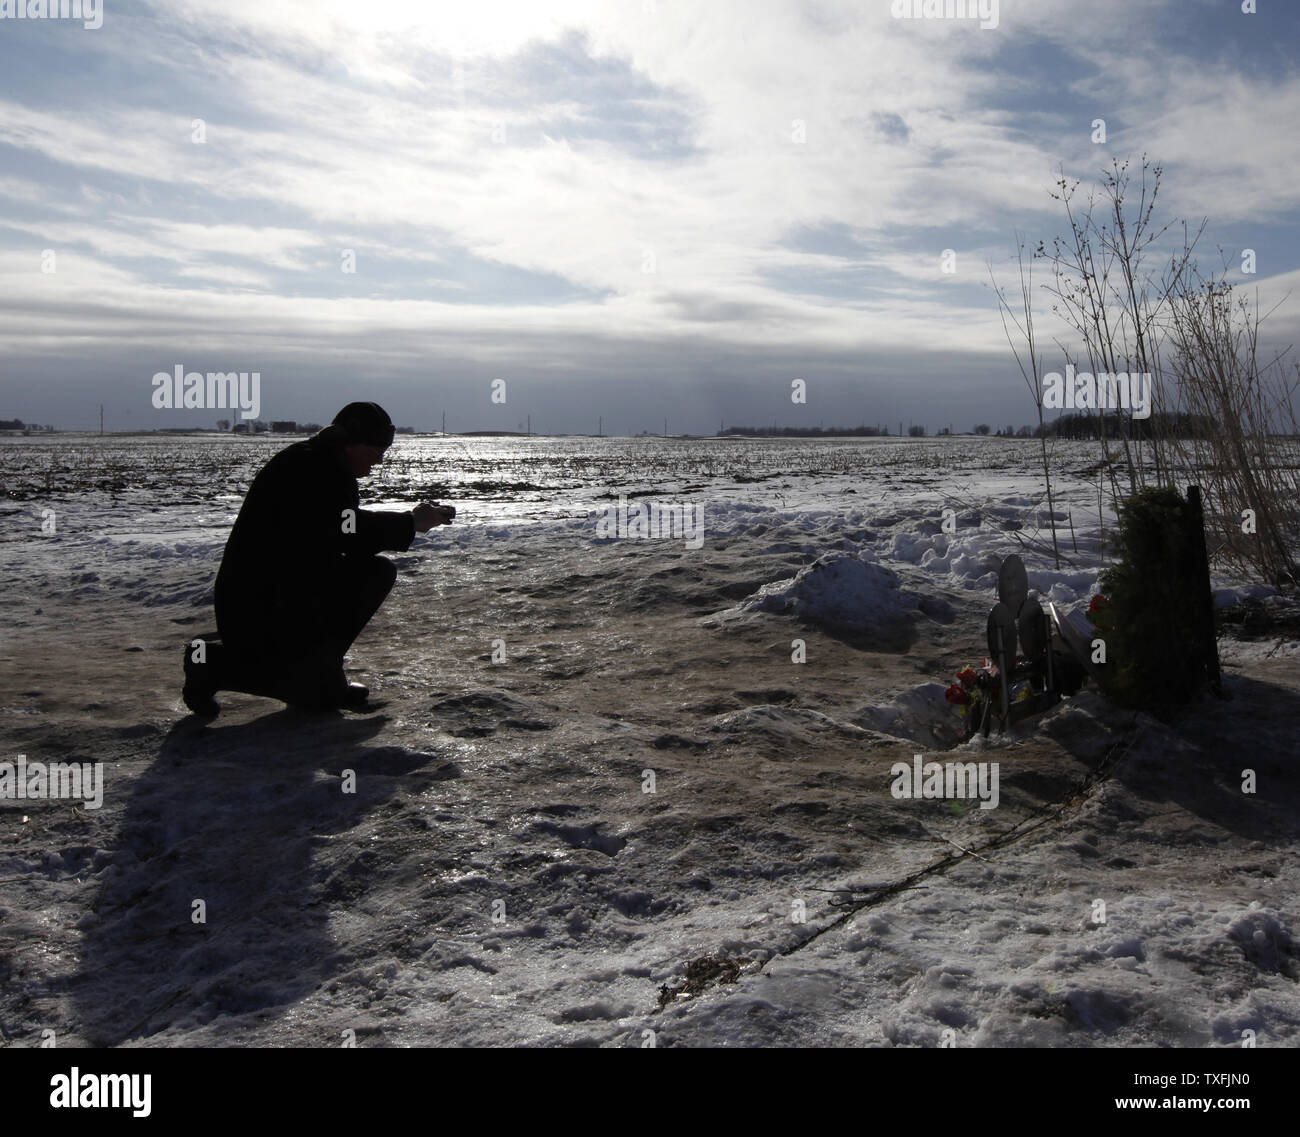 Brian Wilson of Toronto, Canada takes a photo of a memorial at the site of the plane crash that killed Buddy Holly, Ritchie Valens and J. P. 'The Big Bopper' Richardson near Clear Lake, Iowa on February 2, 2009. Singer Don McLean coined the phrase 'the day the music died' in his hit song American Pie referring to the death of the three rock 'n' roll pioneers in the early morning hours of February 3, 1959. Thousands of people descended upon Clear Lake to celebrate the 50th anniversary of 'the day the music died'.   (UPI Photo/Brian Kersey) Stock Photo